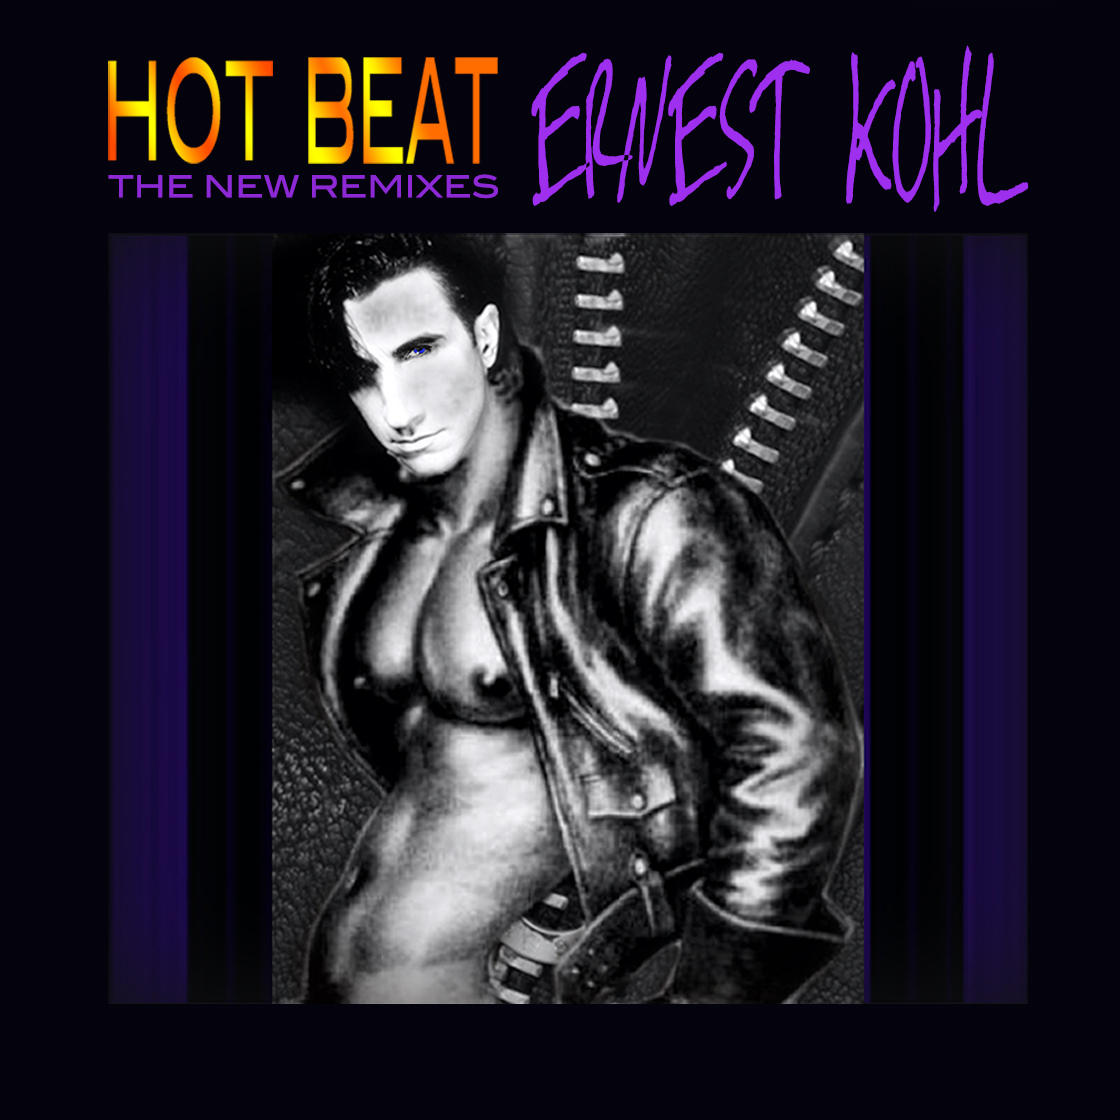 EMG/UMG INC. Proudly Announce The New Smash Hit Maxi-Single: ERNEST KOHL -'HOT BEAT' (THE NEW REMIXES)   
Feat. 25 New Hot Remixes!🔥
iTunes: apple.co/3WWOaZI
Amazon: rb.gy/tuj9a
Spotify: rb.gy/i72dx 
#Top5 #Top40 #NewRelease #DanceMusic #EDM #Pop